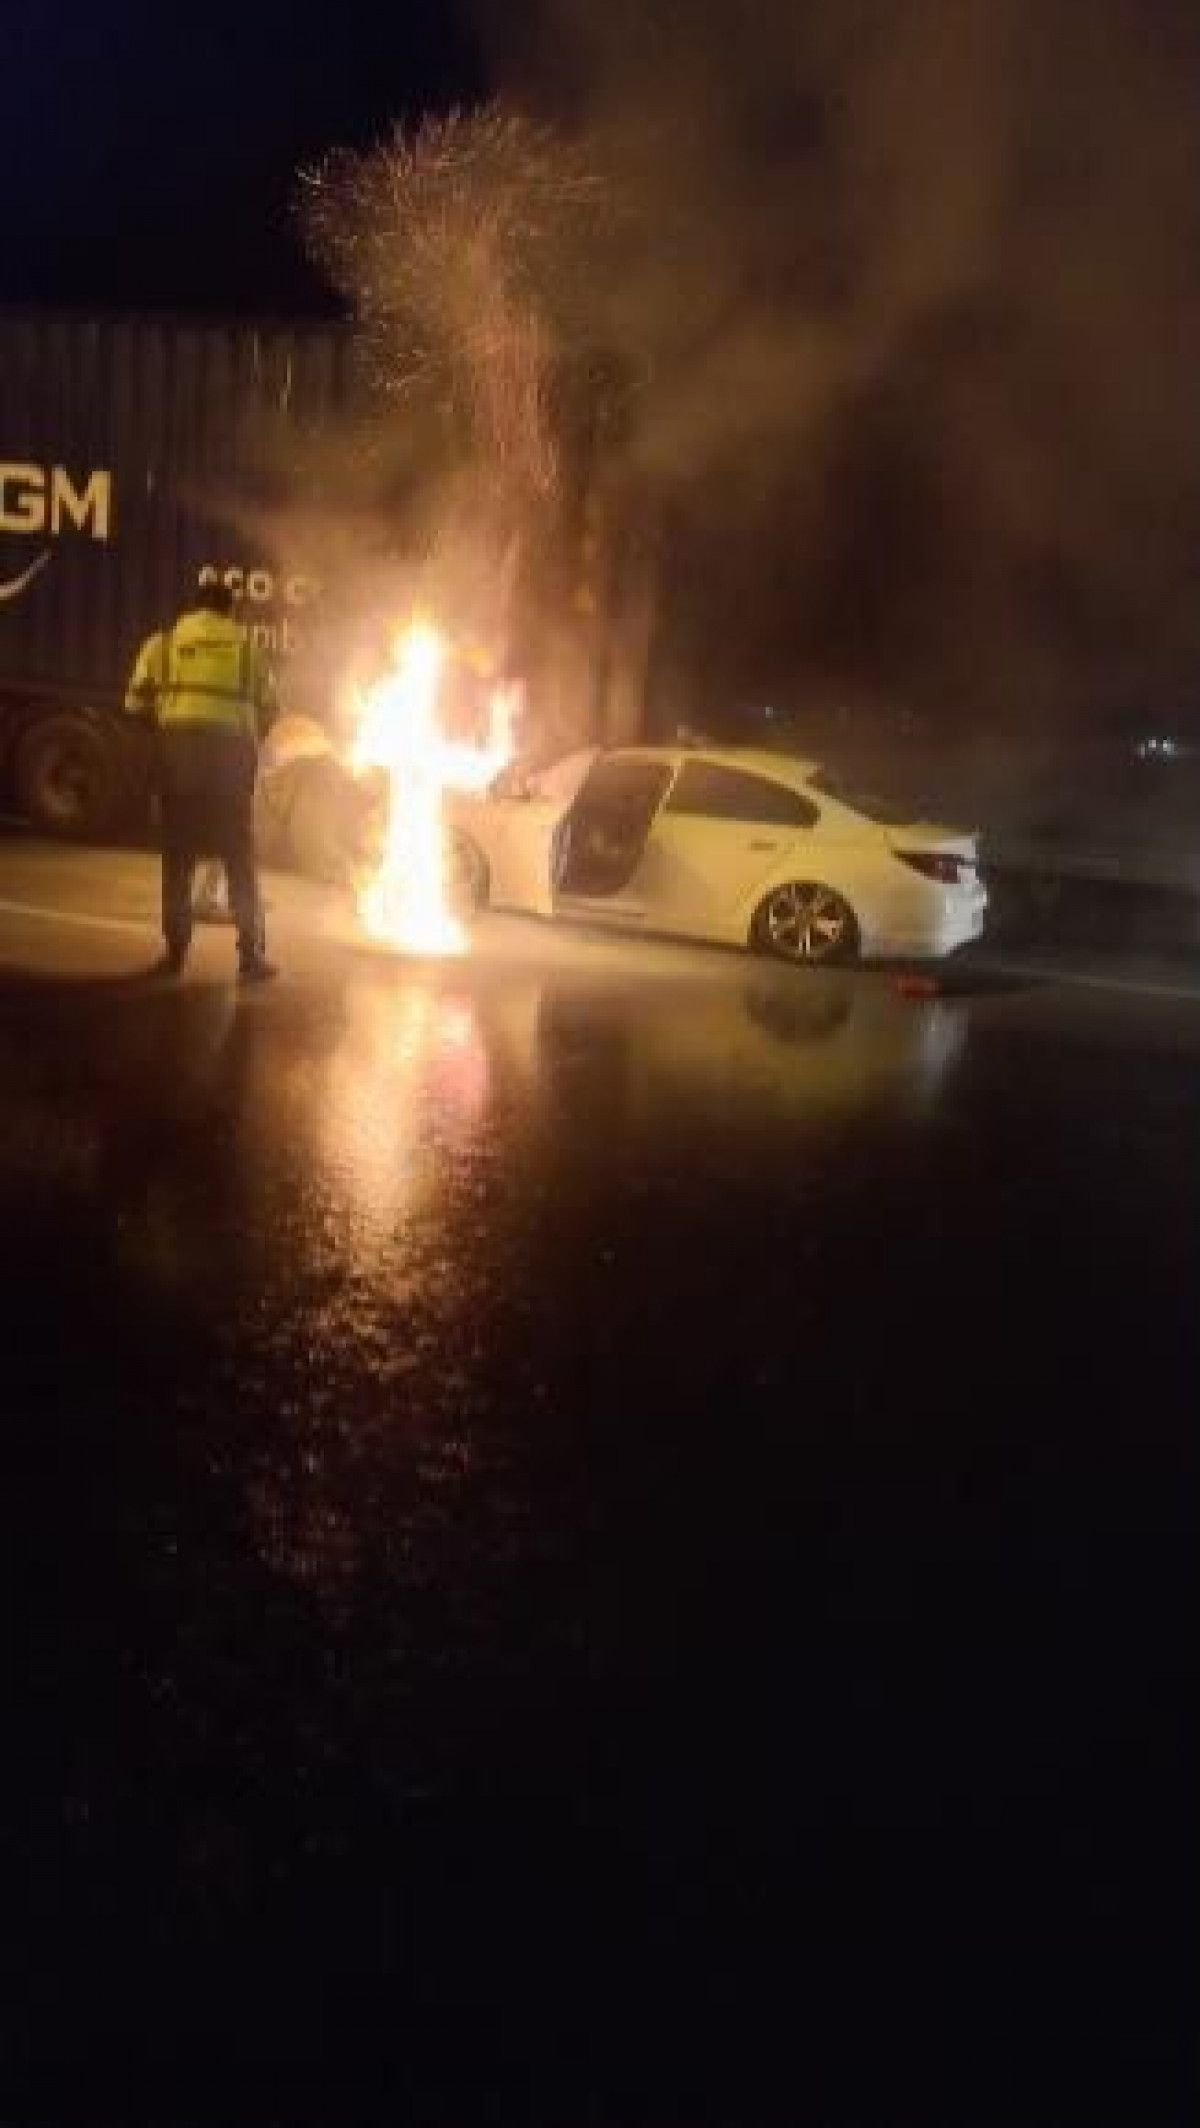 The driver of the car that hit the truck in Izmir burned to death #2